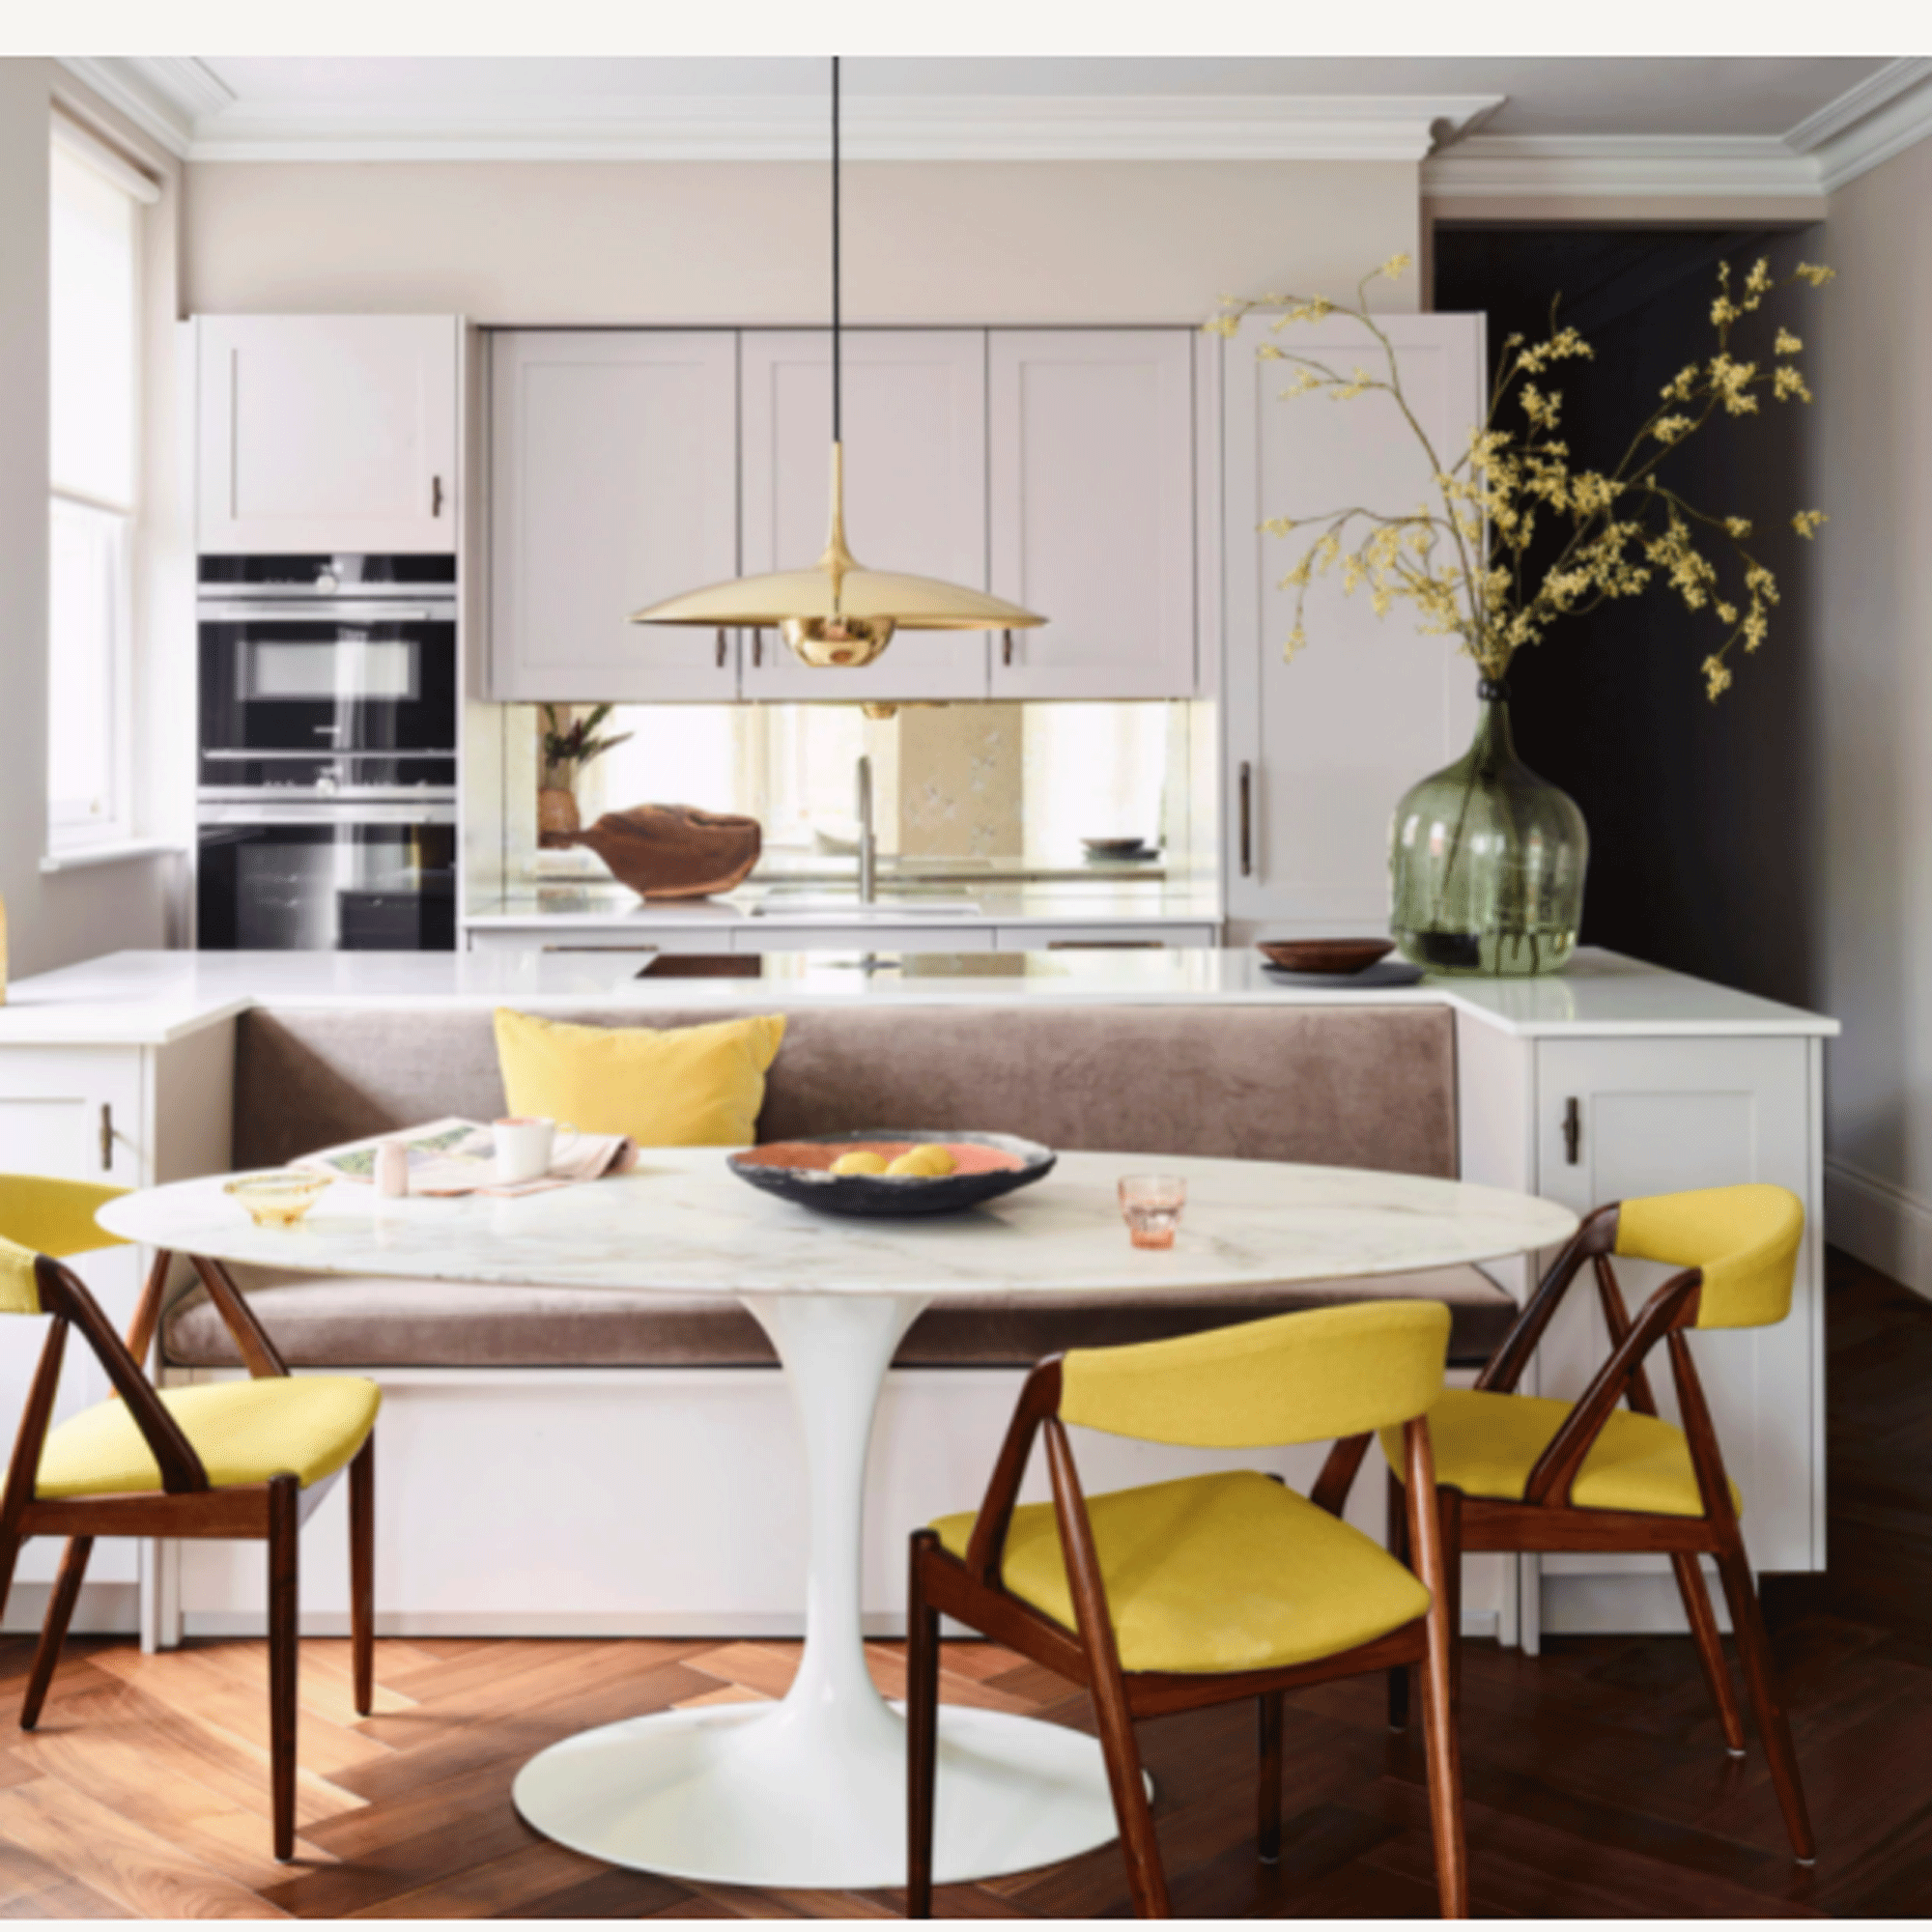 Banquette seating in kitchen with bright yellow chairs